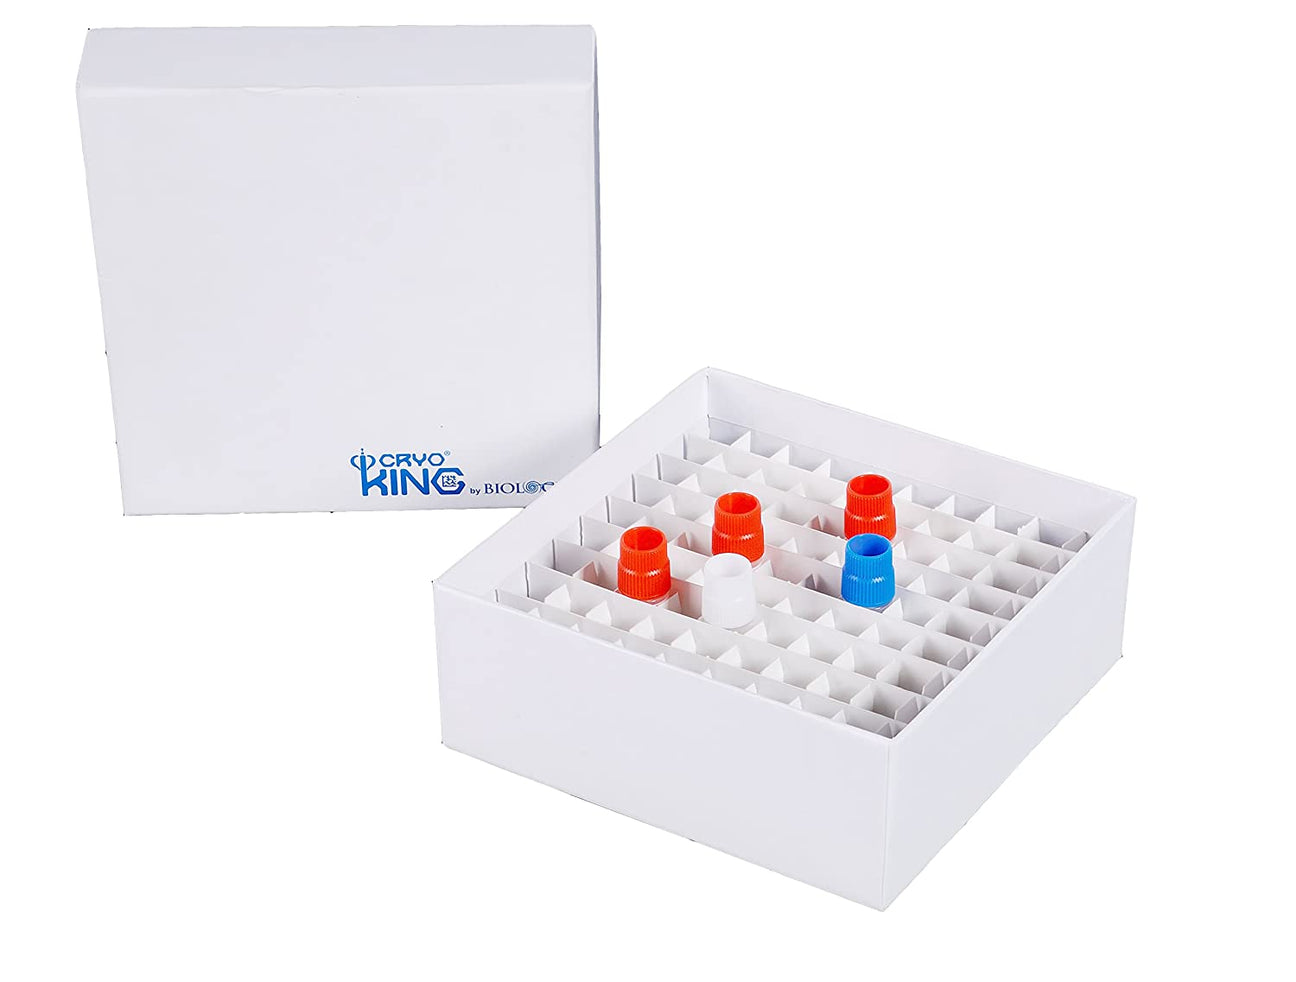 LSP Cryo/freezer boxes with 81-place cell divider. Life Science Products